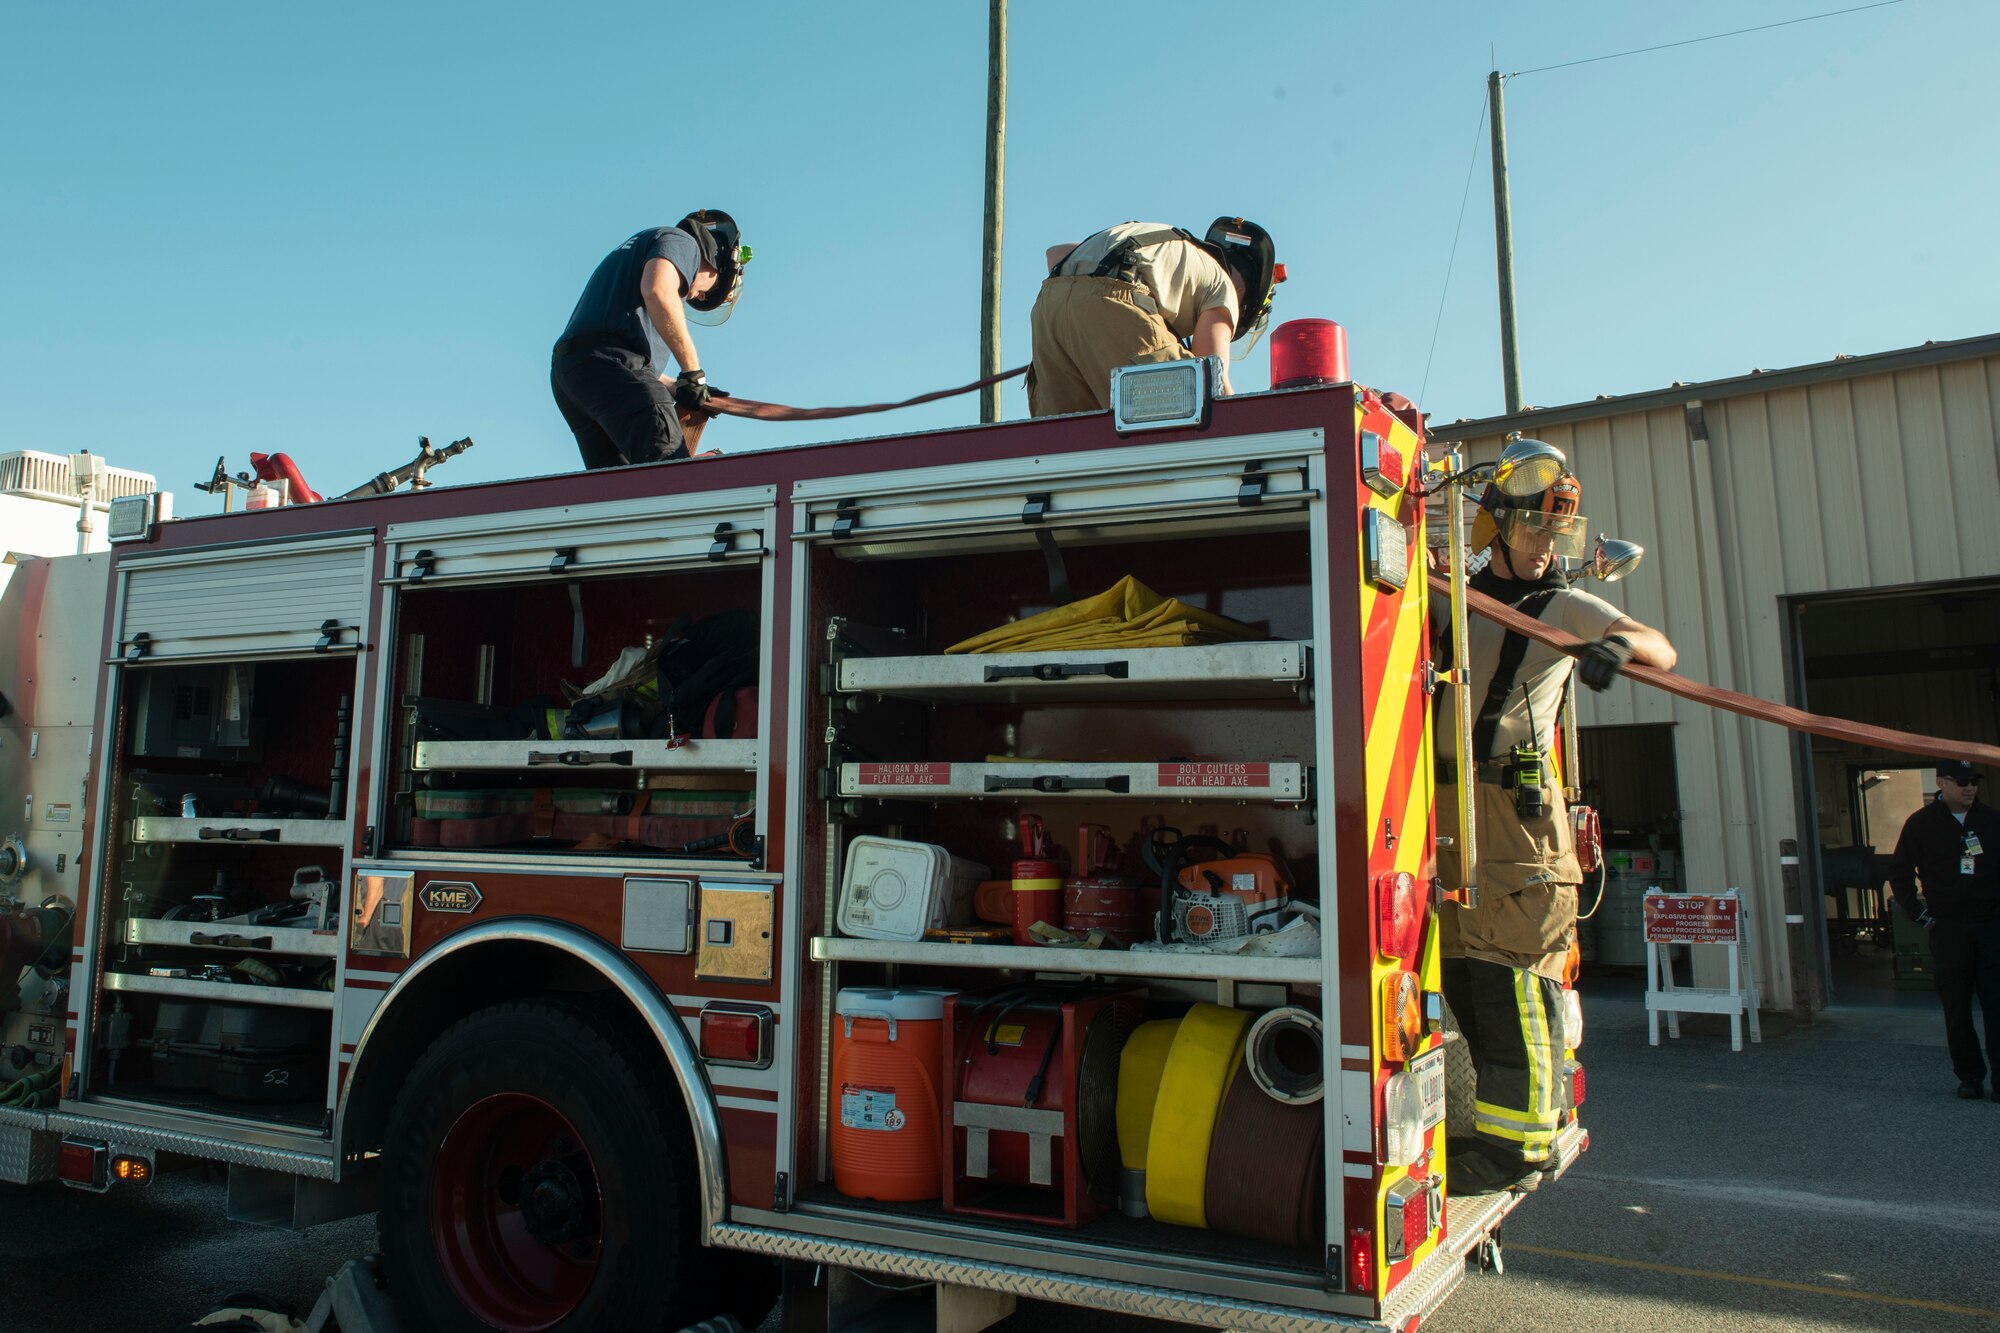 Photo of three Airmen packing up a firetruck after an evacuation drill.